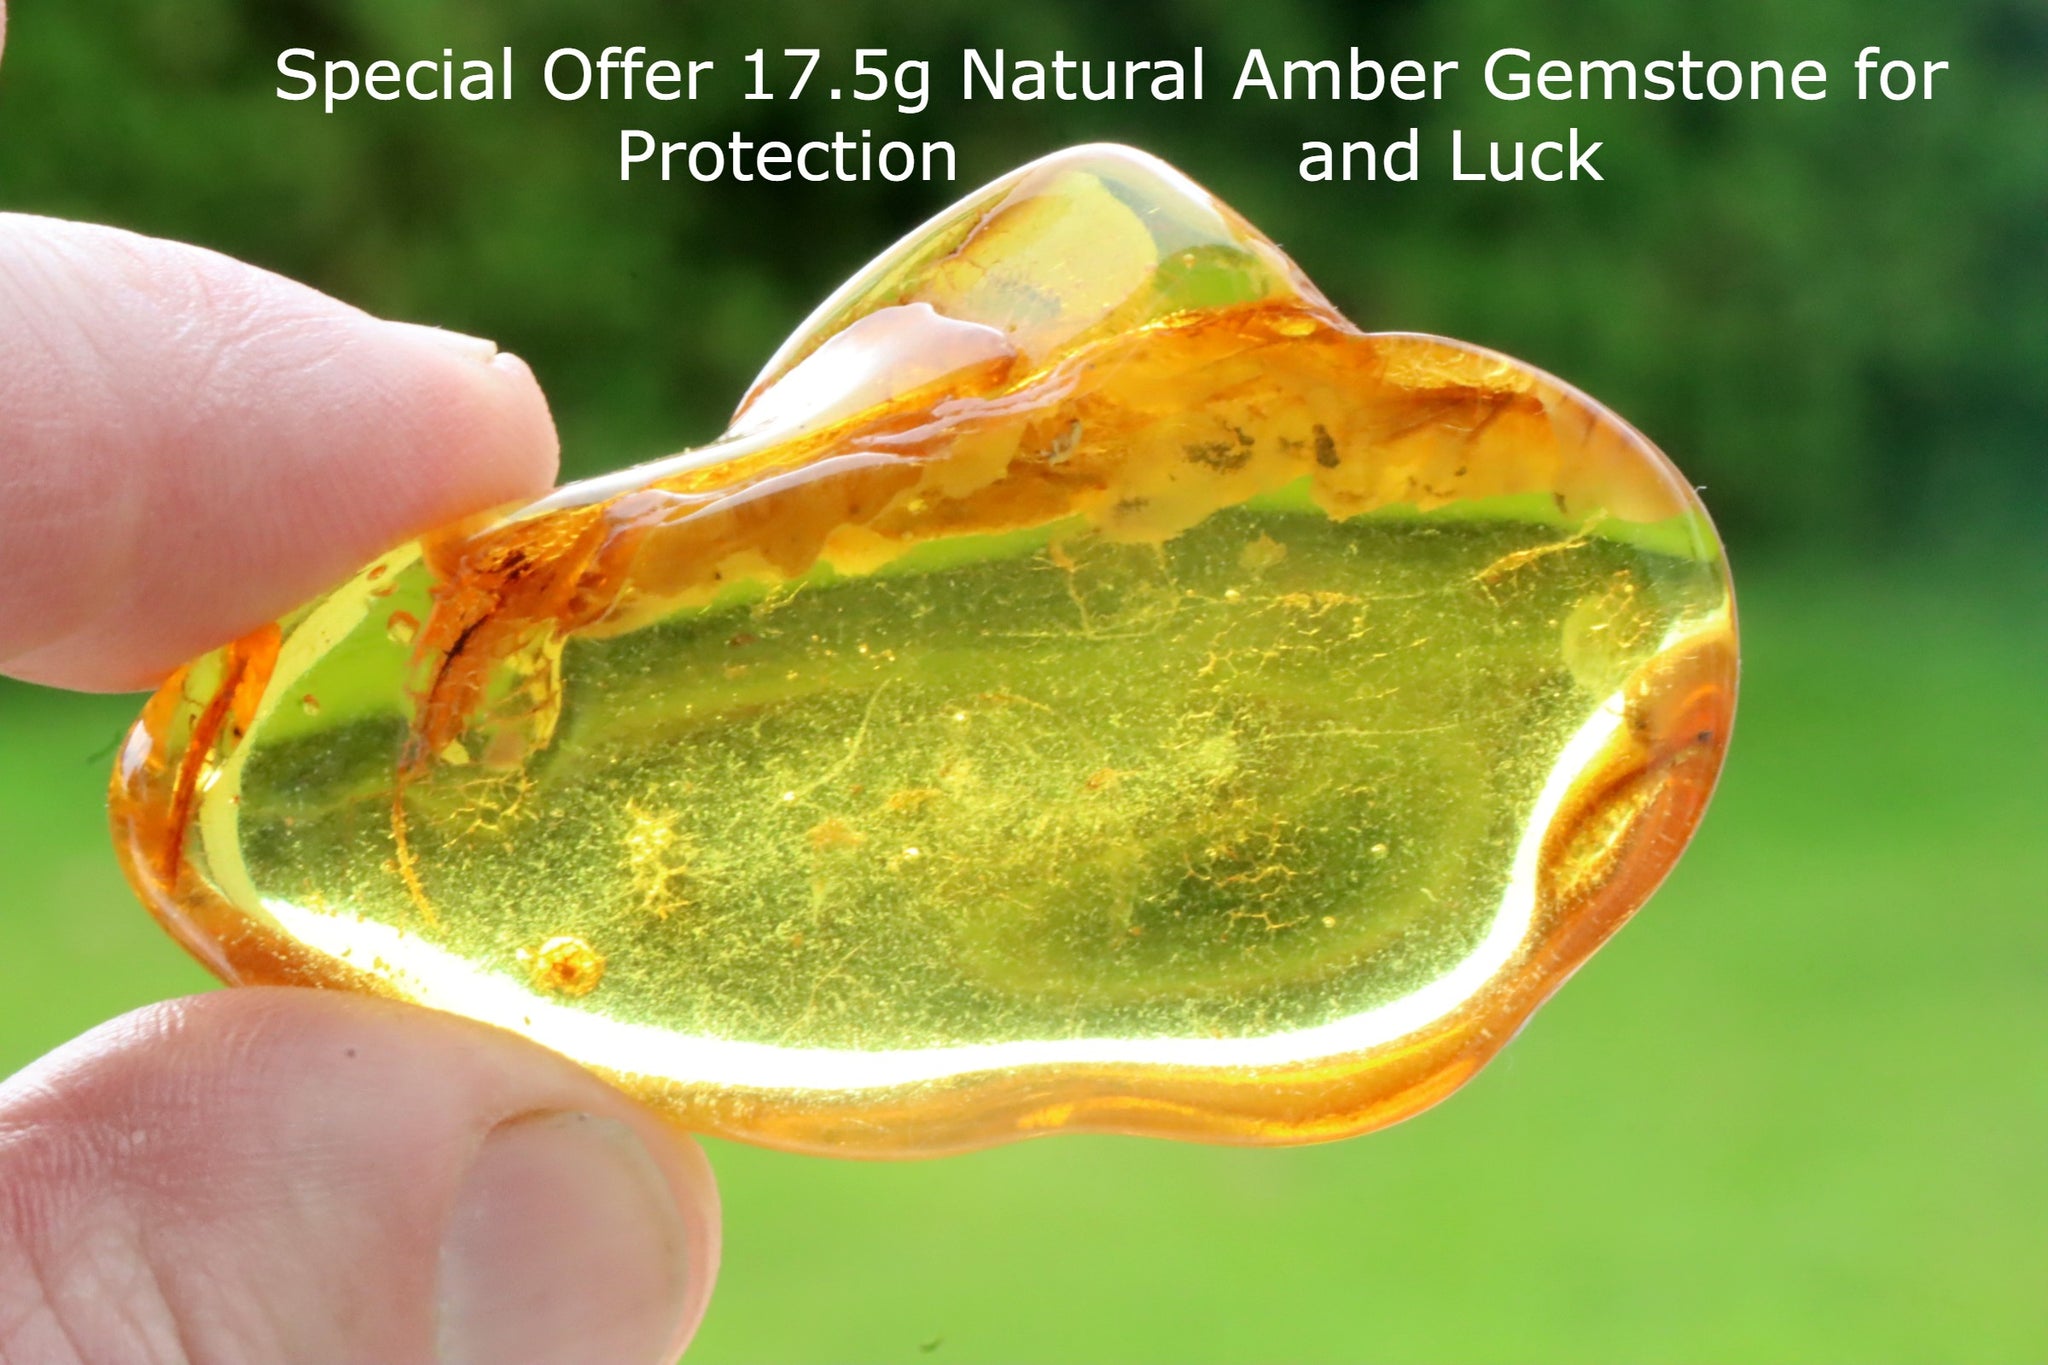 Special Offer 17.5g Natural Amber Gemstone for Protection and Luck